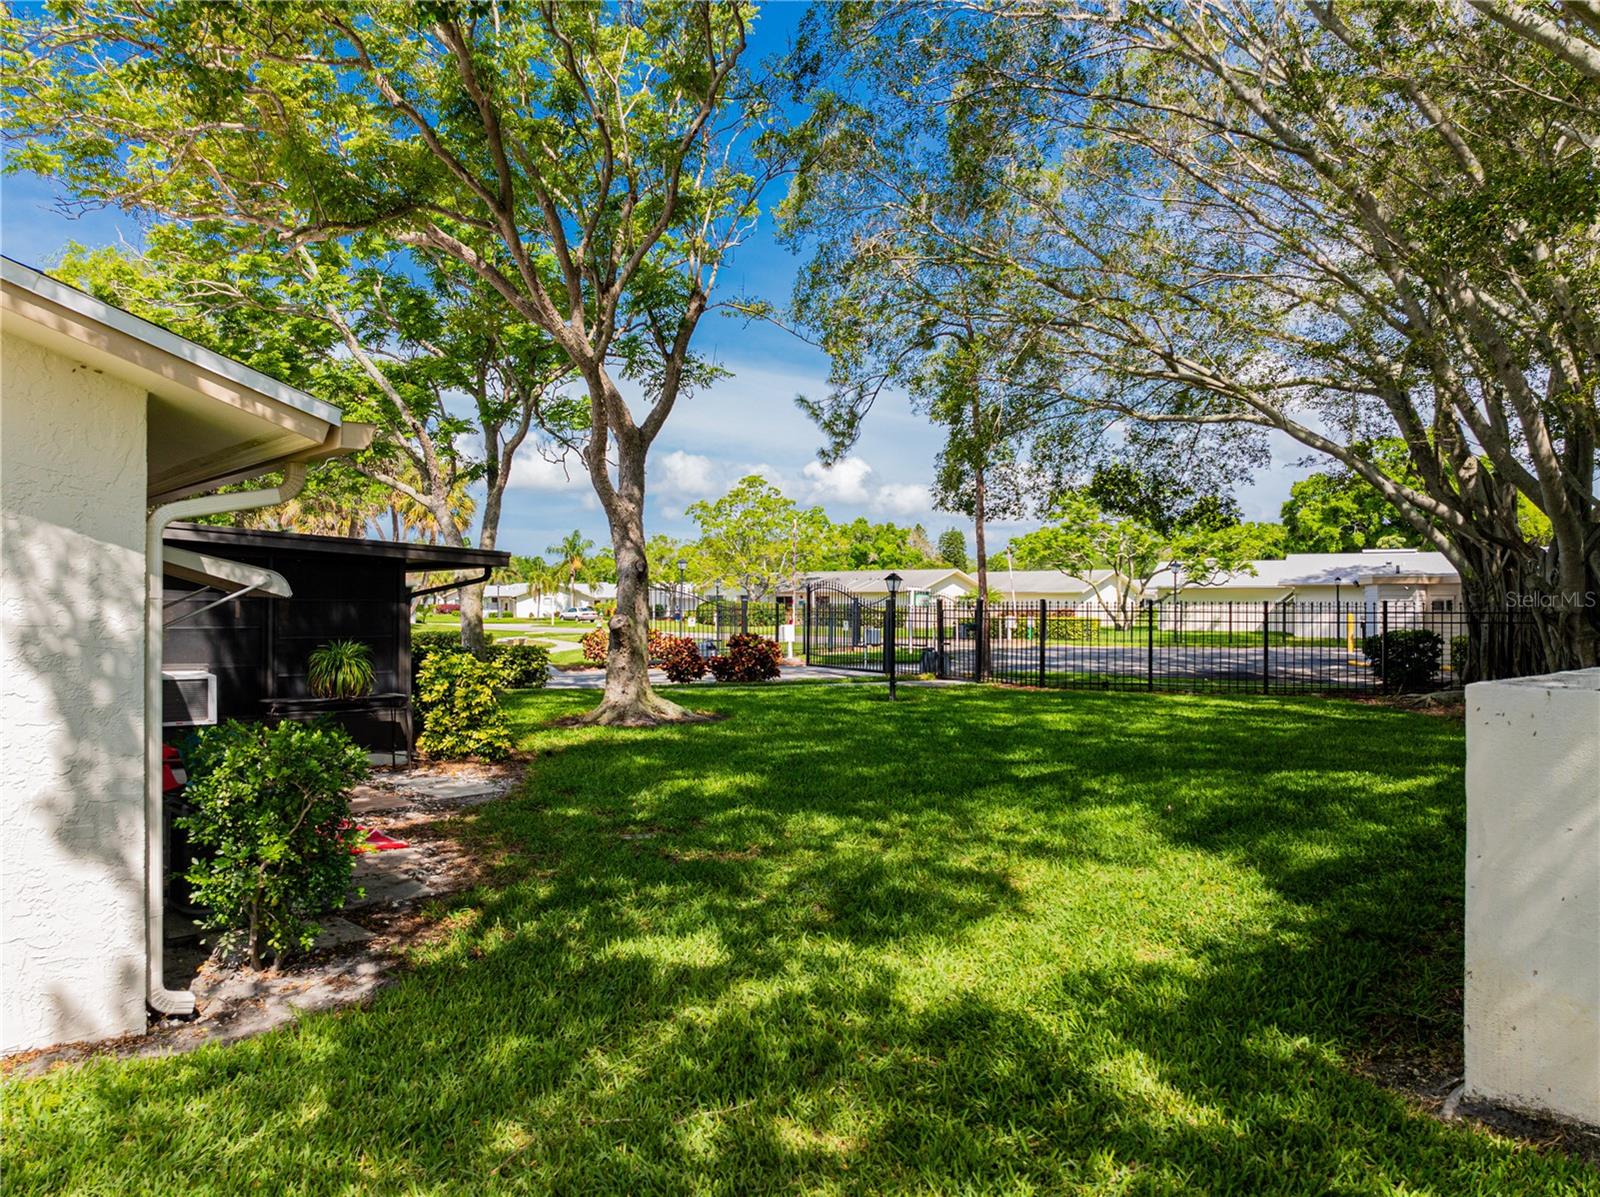 Large back yard with quick access to Front Community gate